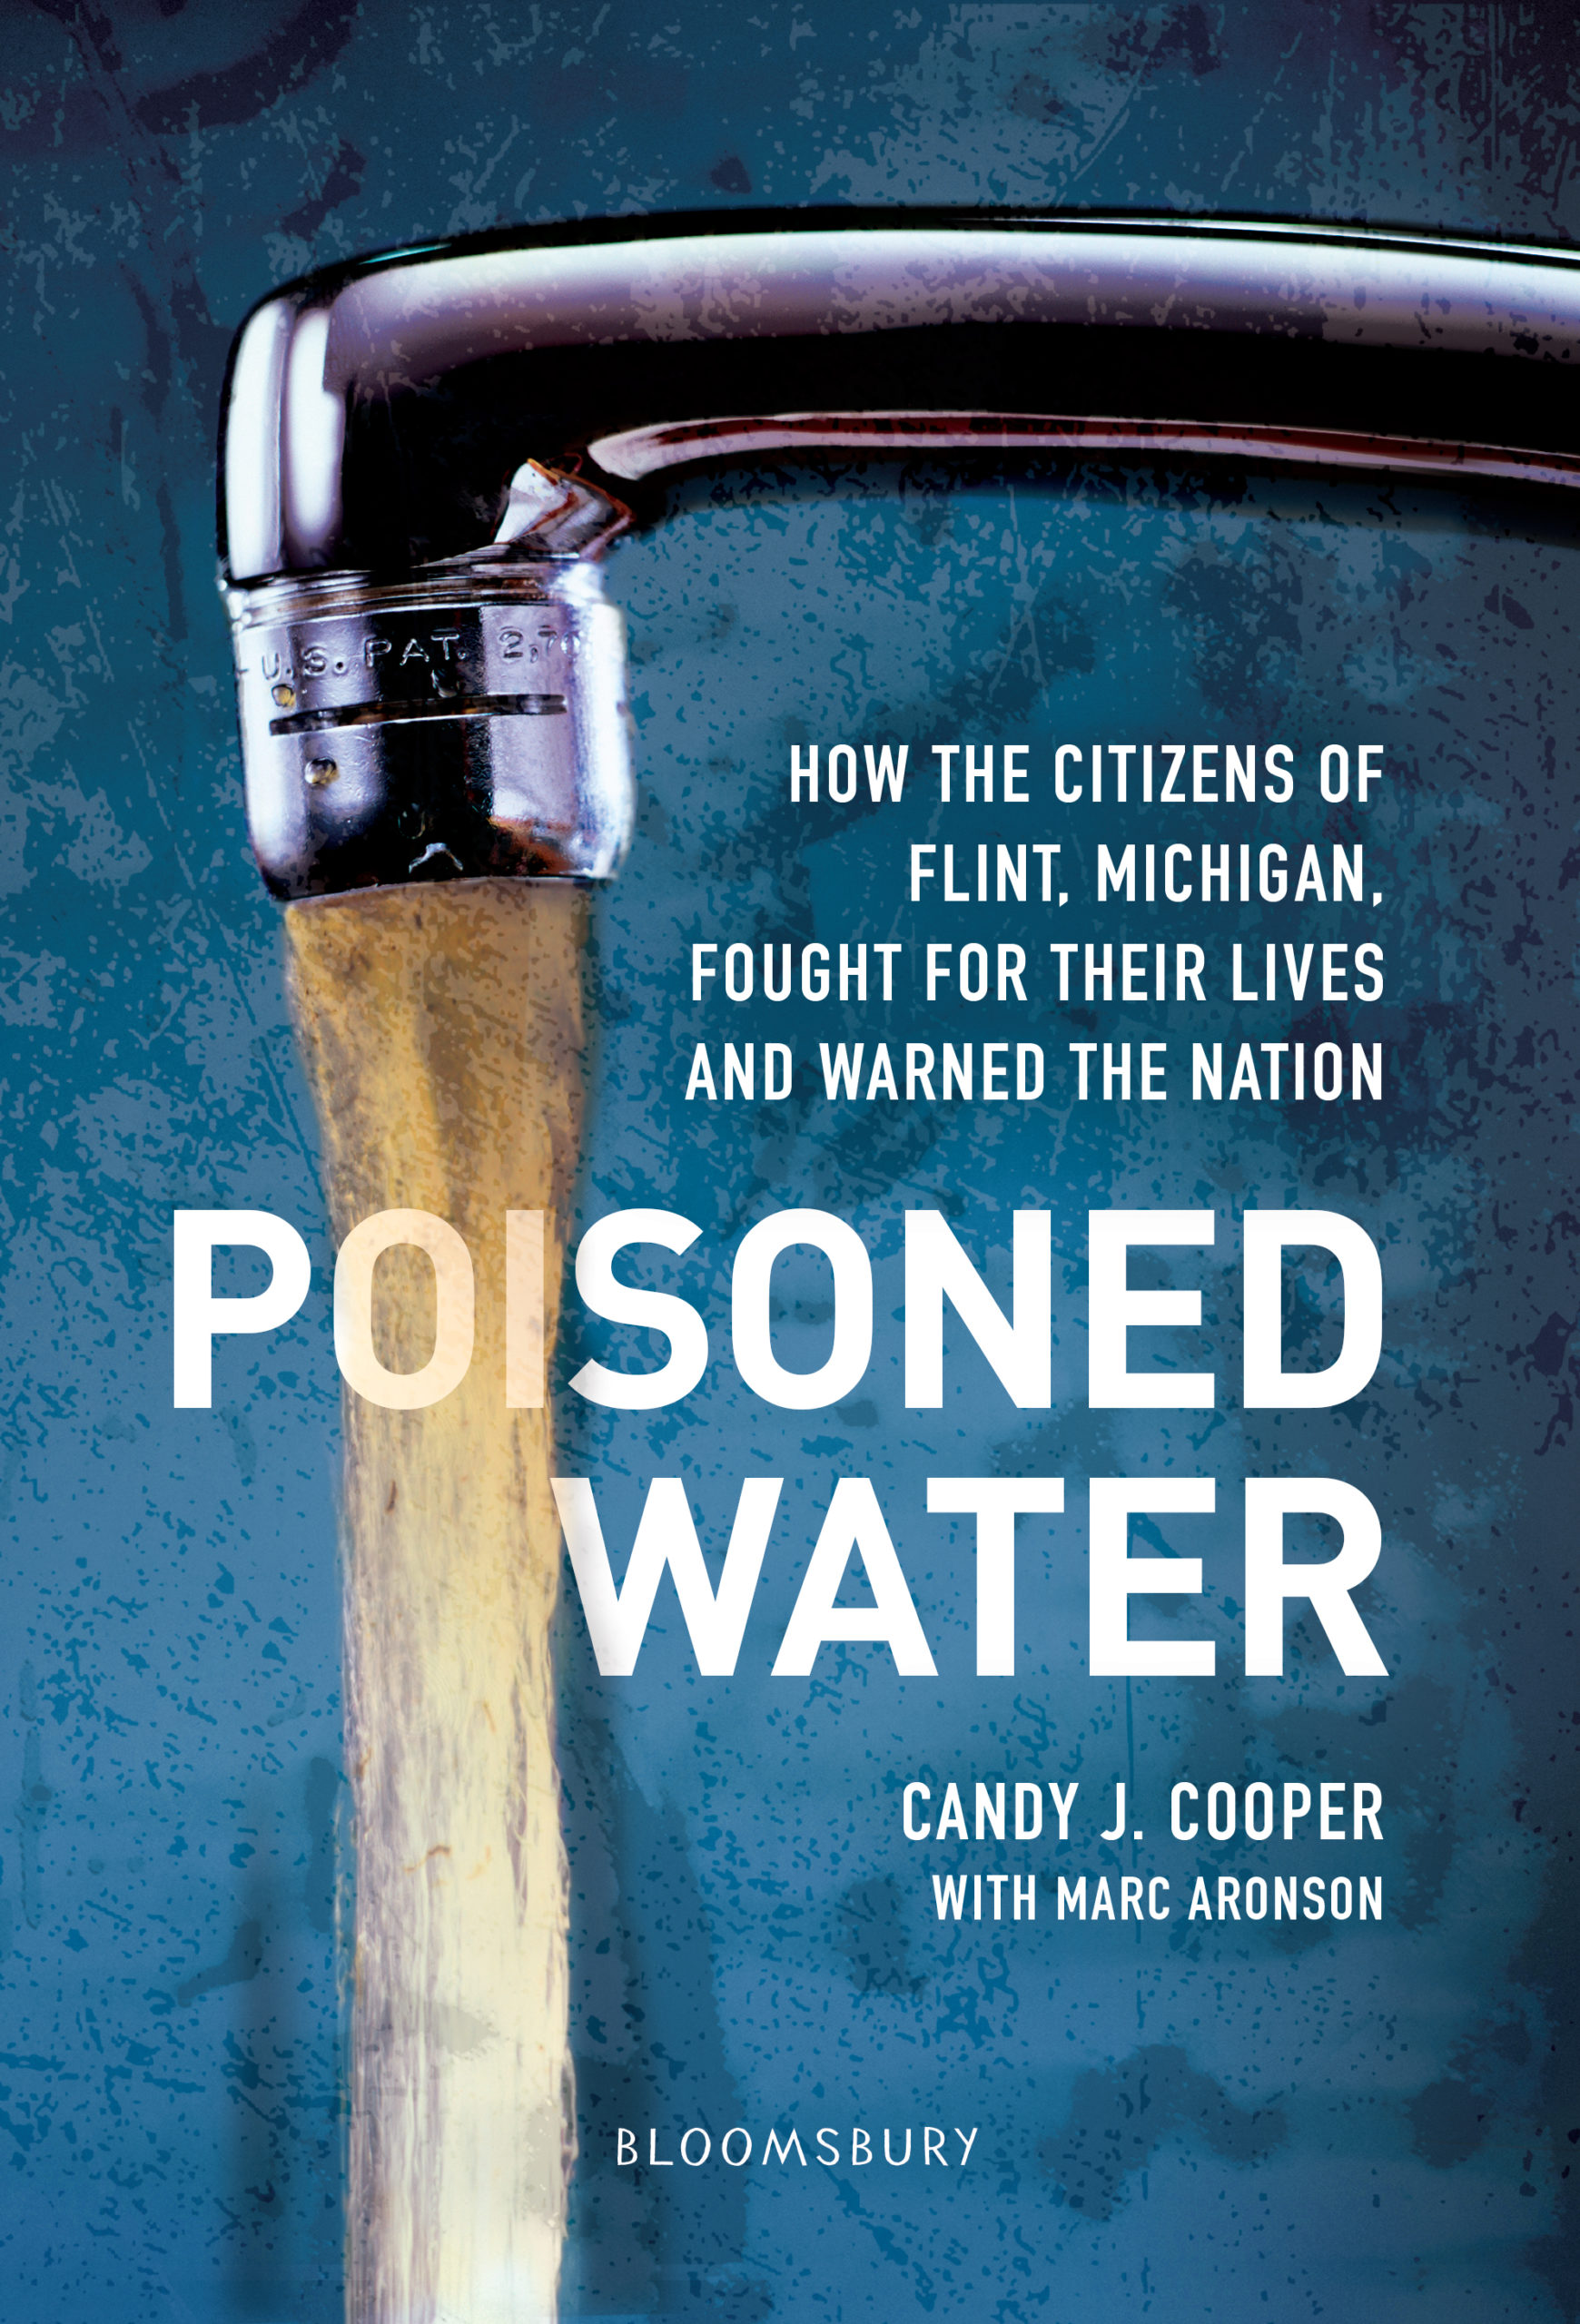 Poisoned Water How the Citizens of Flint, Michigan